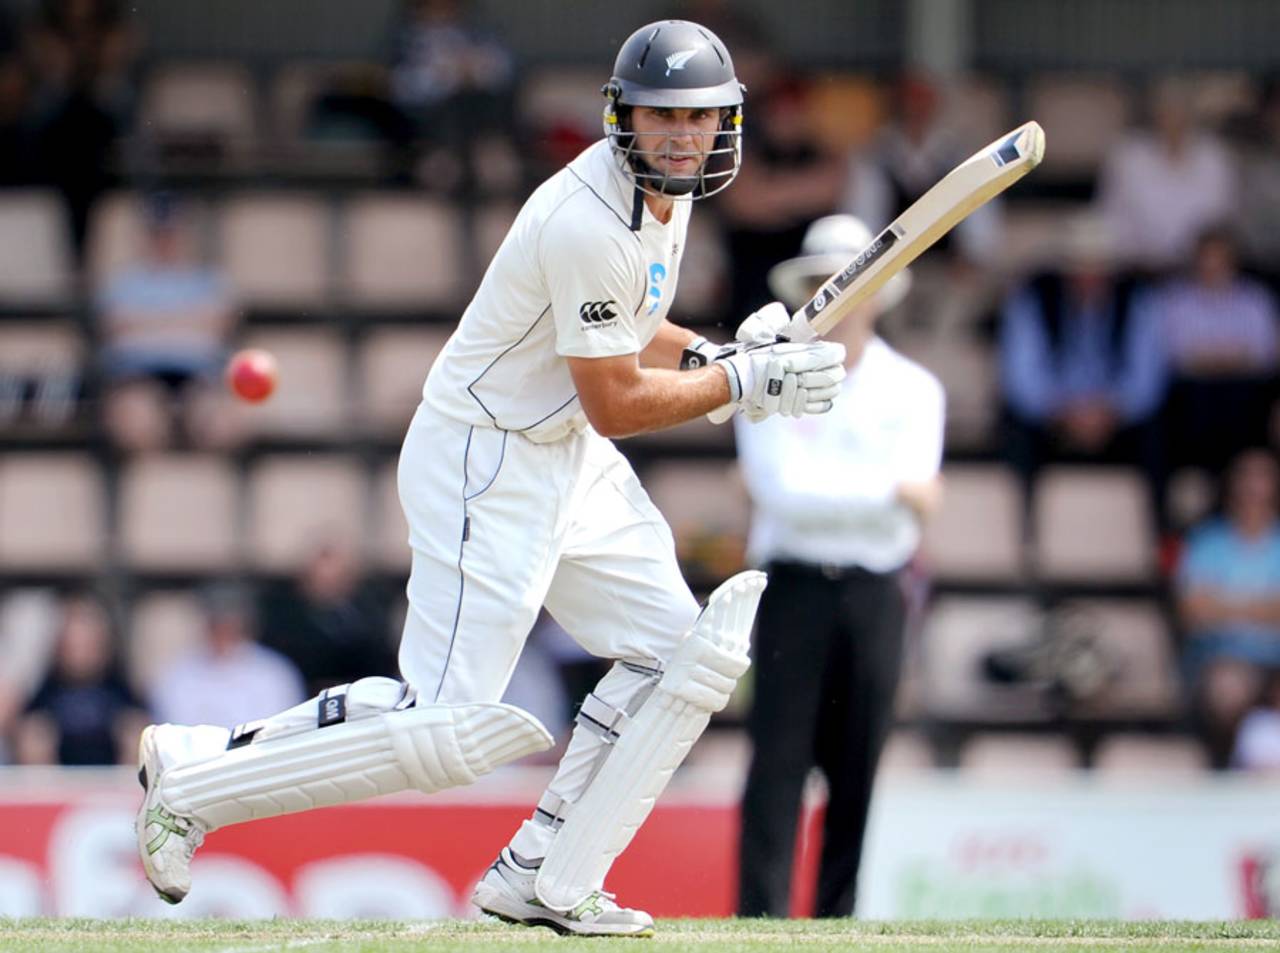 Dean Brownlie knocks one away during his fifty, Australia v New Zealand, second Test, Hobart, day one, December 9 2011